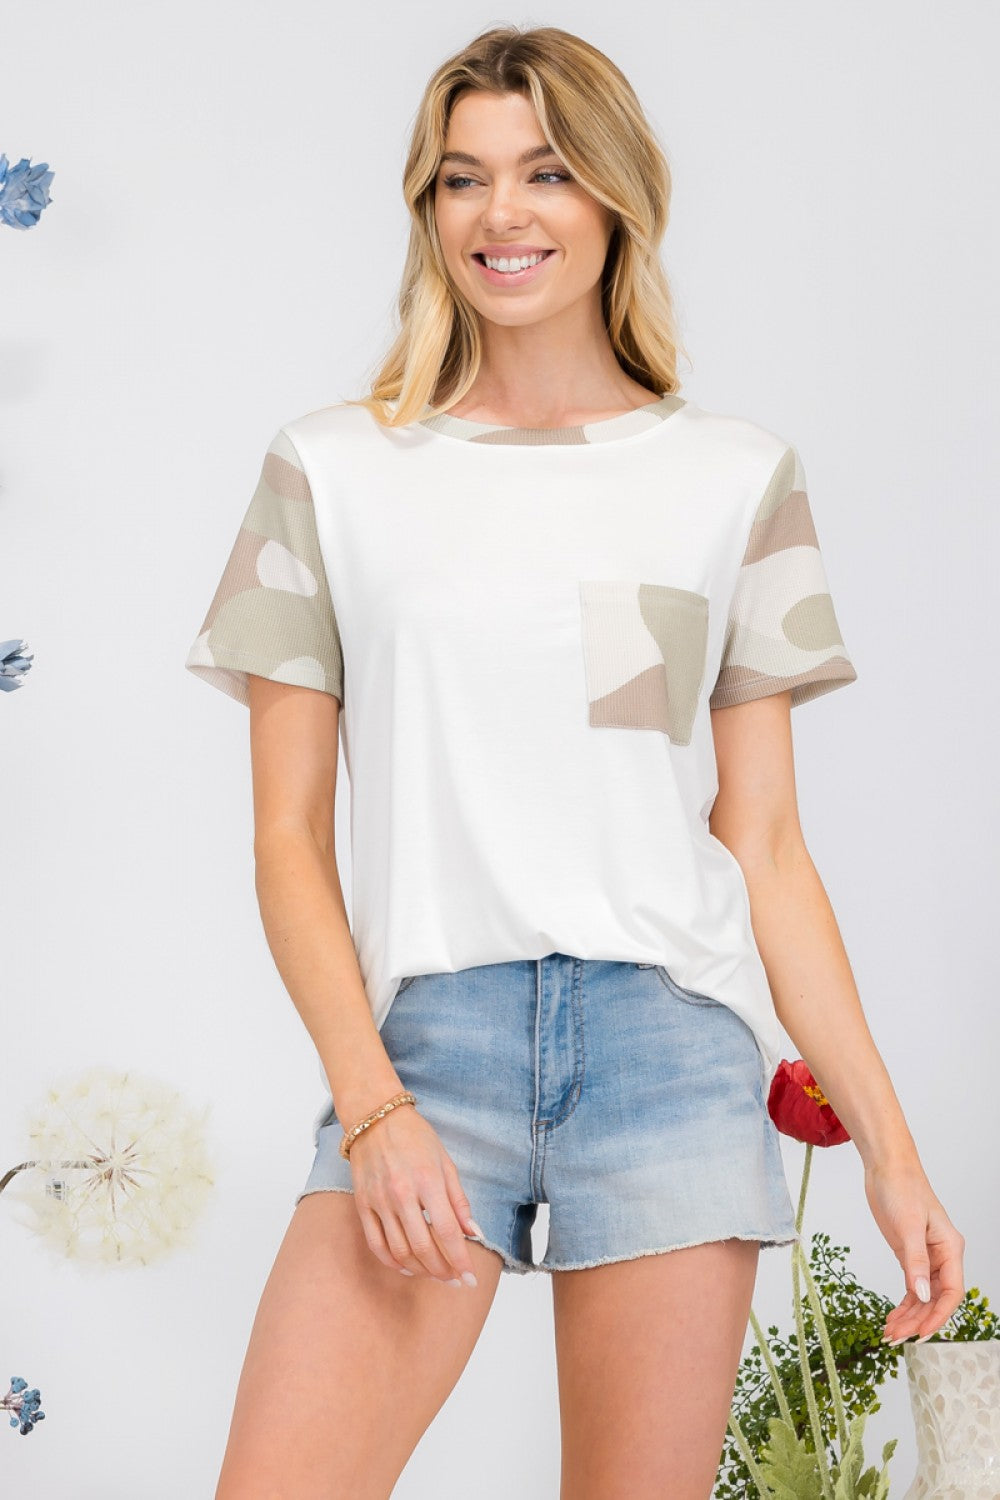 Celeste Clothing- Solid top with camo sleeves contrast print and pocket